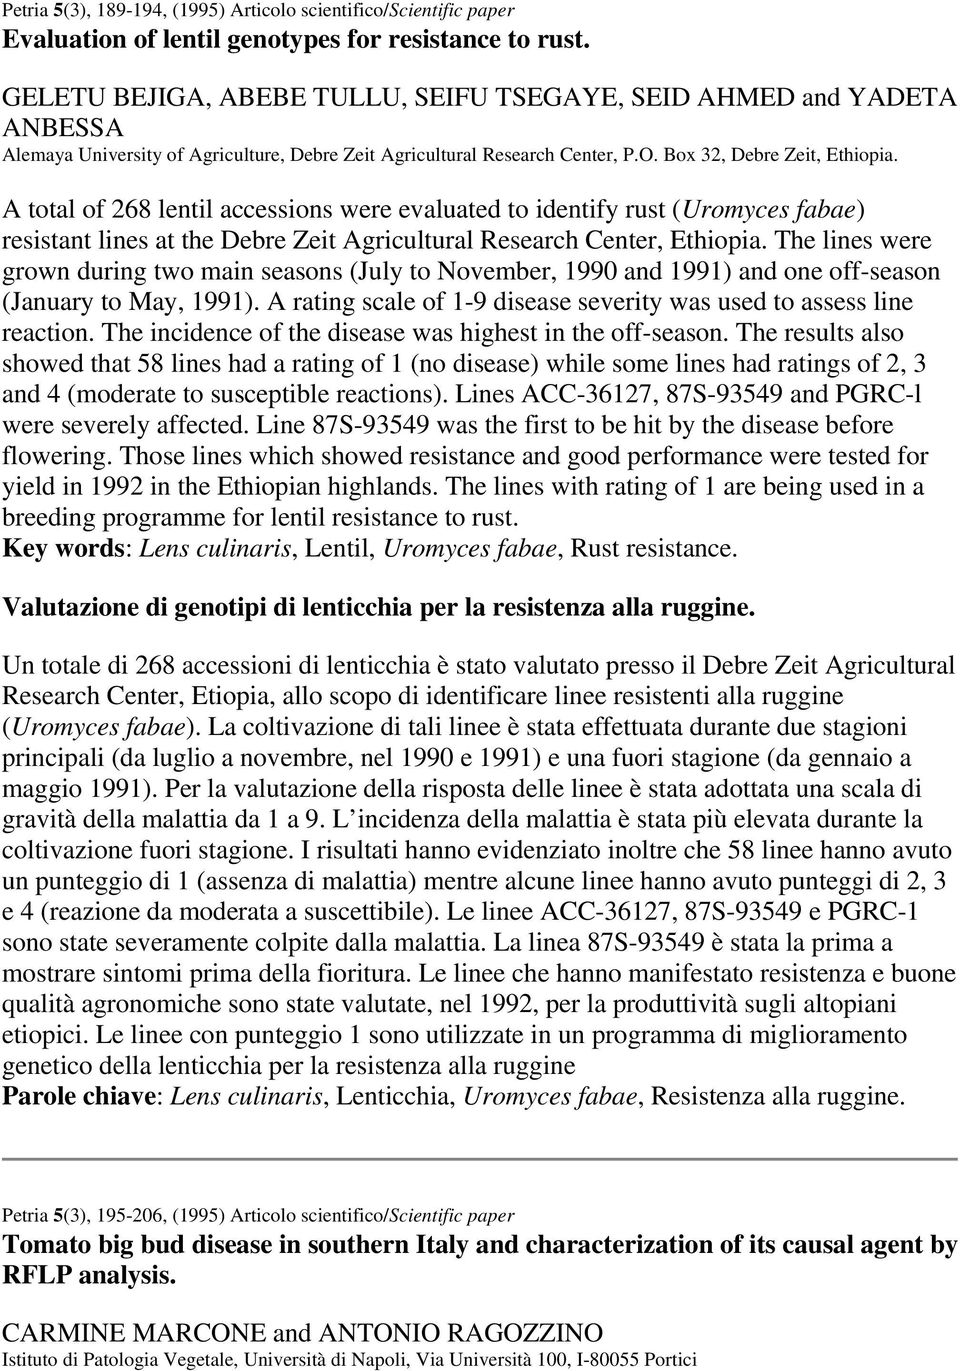 A total of 268 lentil accessions were evaluated to identify rust (Uromyces fabae) resistant lines at the Debre Zeit Agricultural Research Center, Ethiopia.